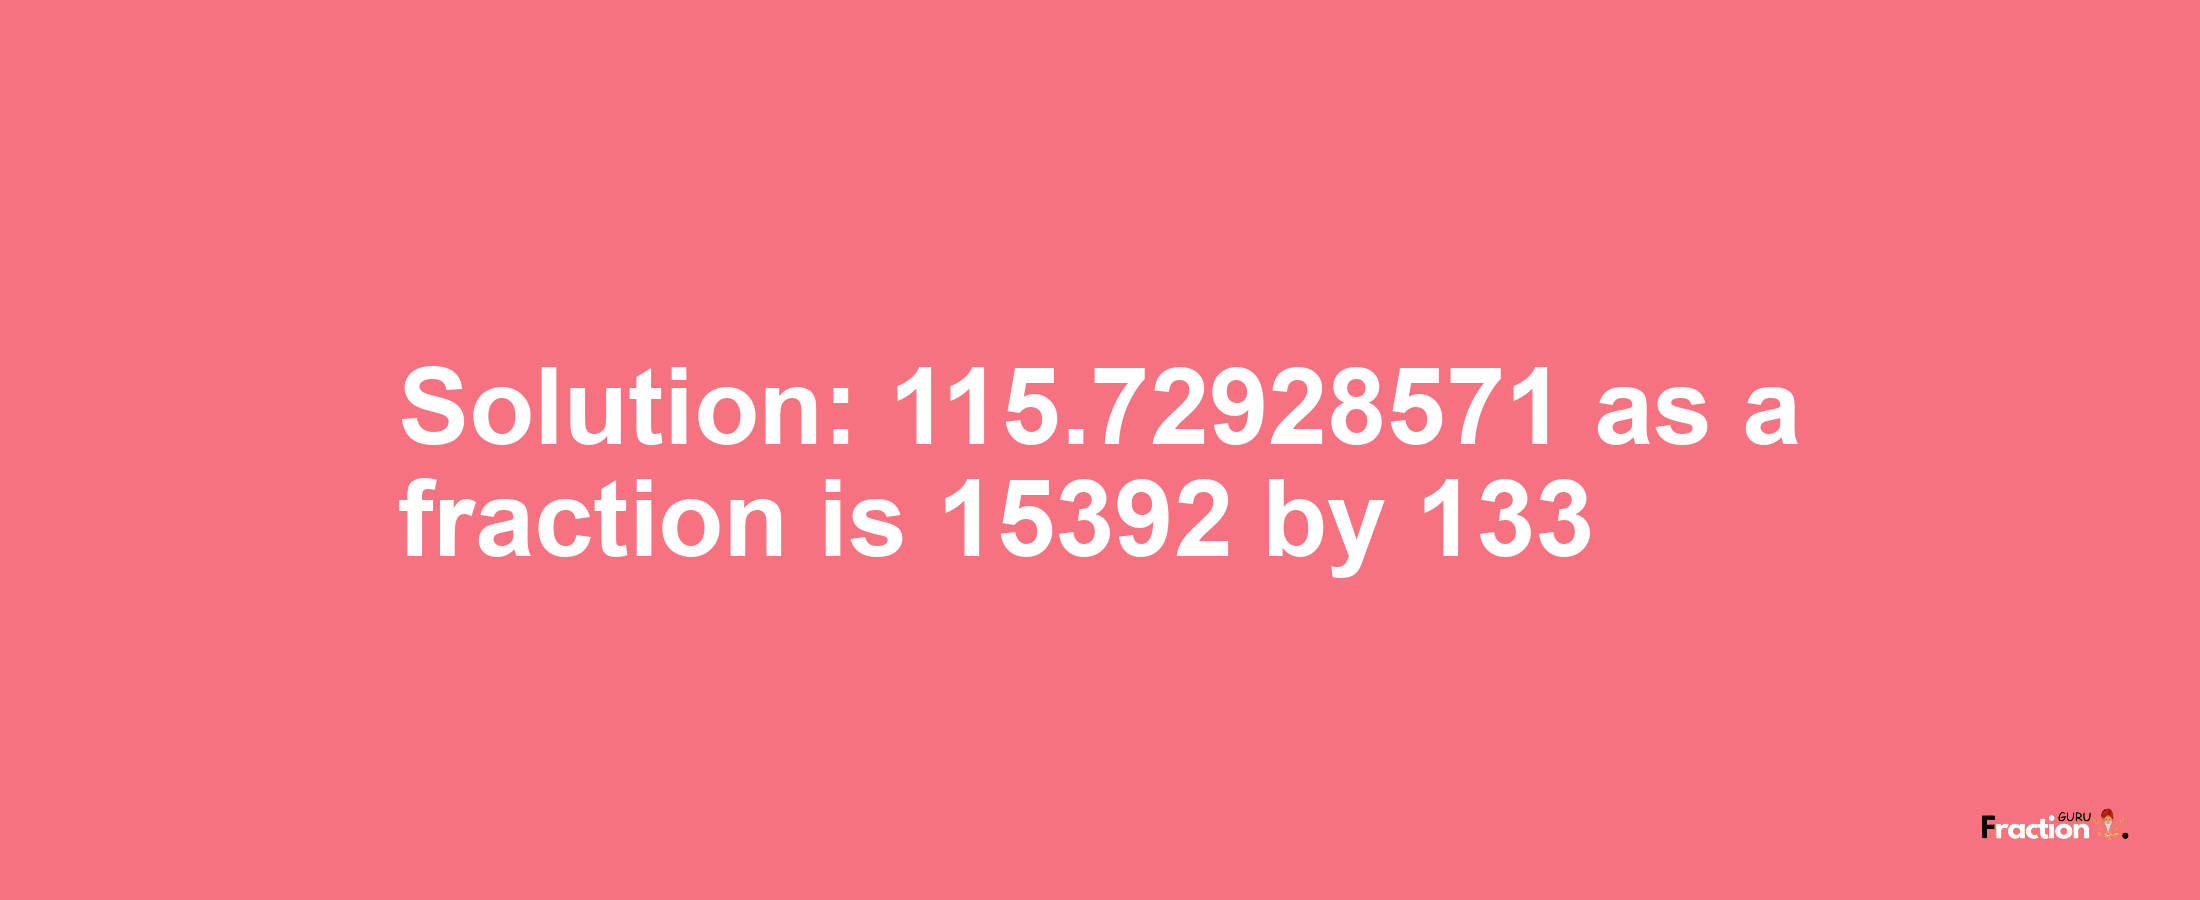 Solution:115.72928571 as a fraction is 15392/133